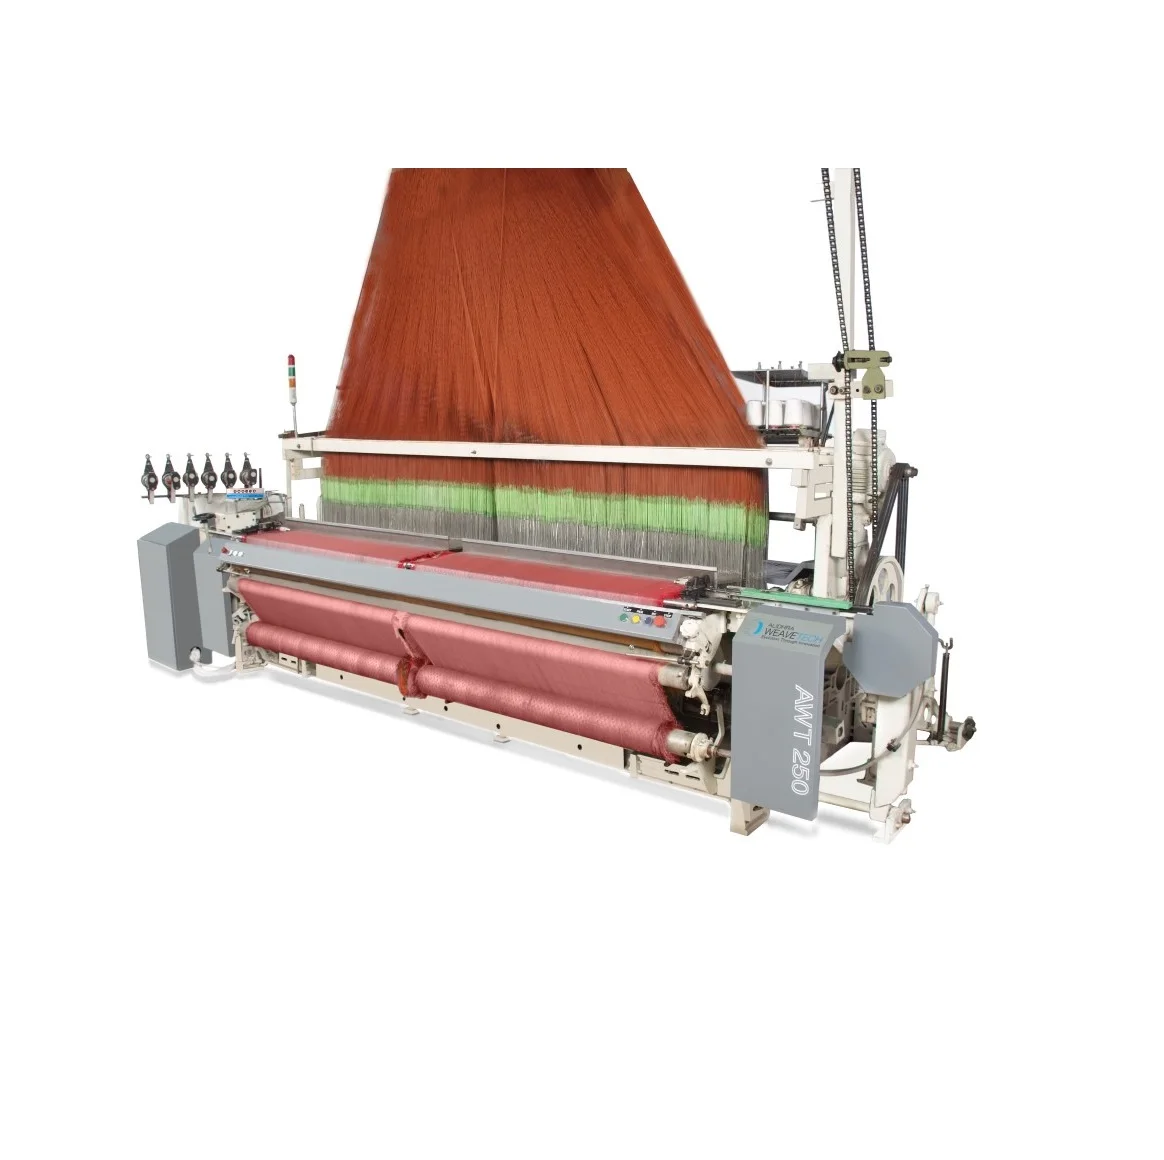 High Precision Rapier Weaving Loom Suitable to run upto 250 rpm At Wholesale Prices For Export From India (11000003380179)